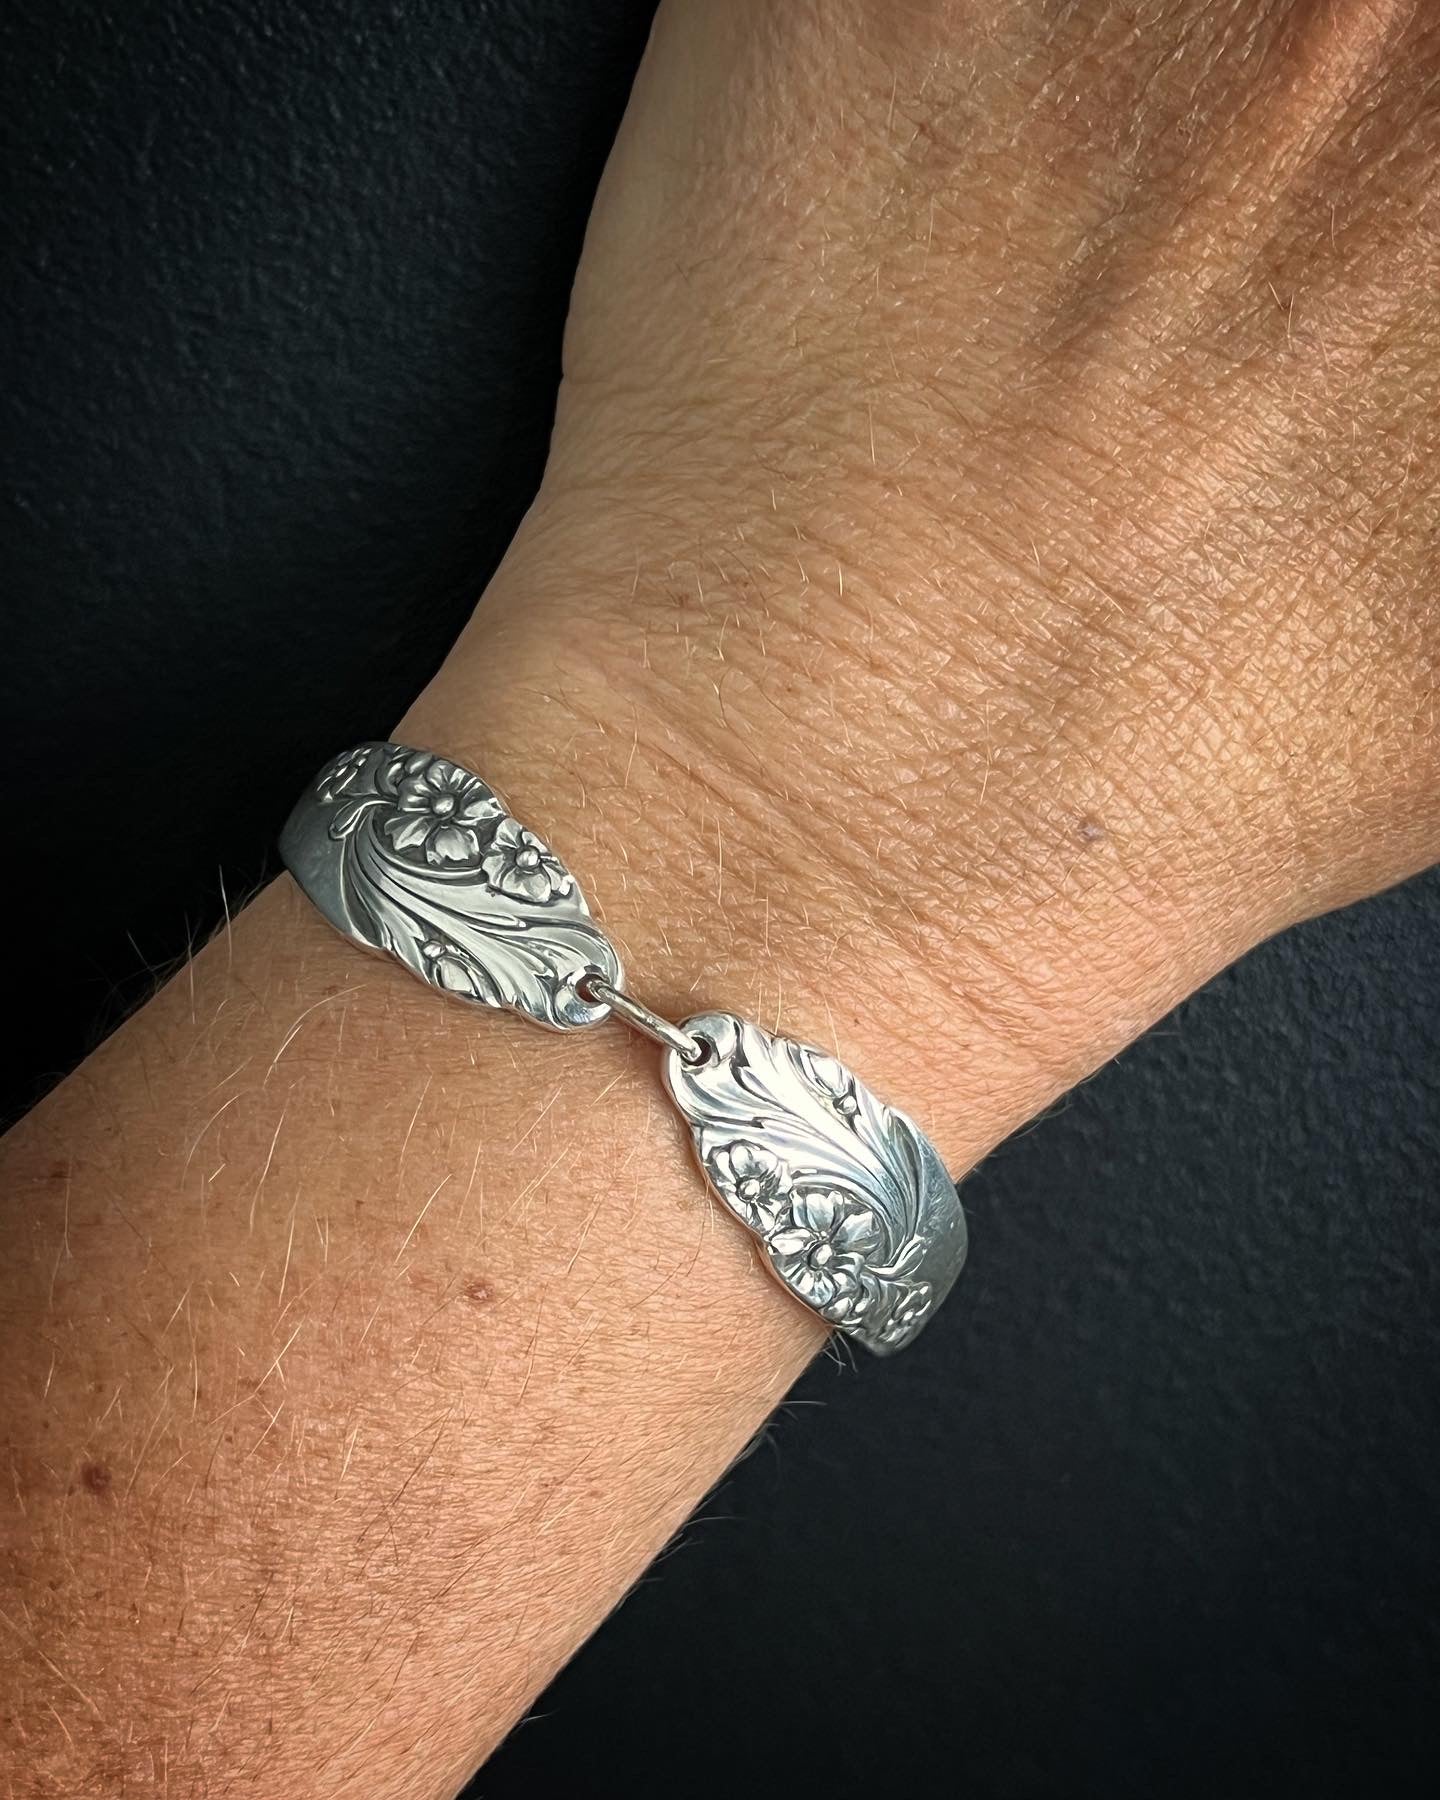 Bracelet handcrafted from antique spoon handles